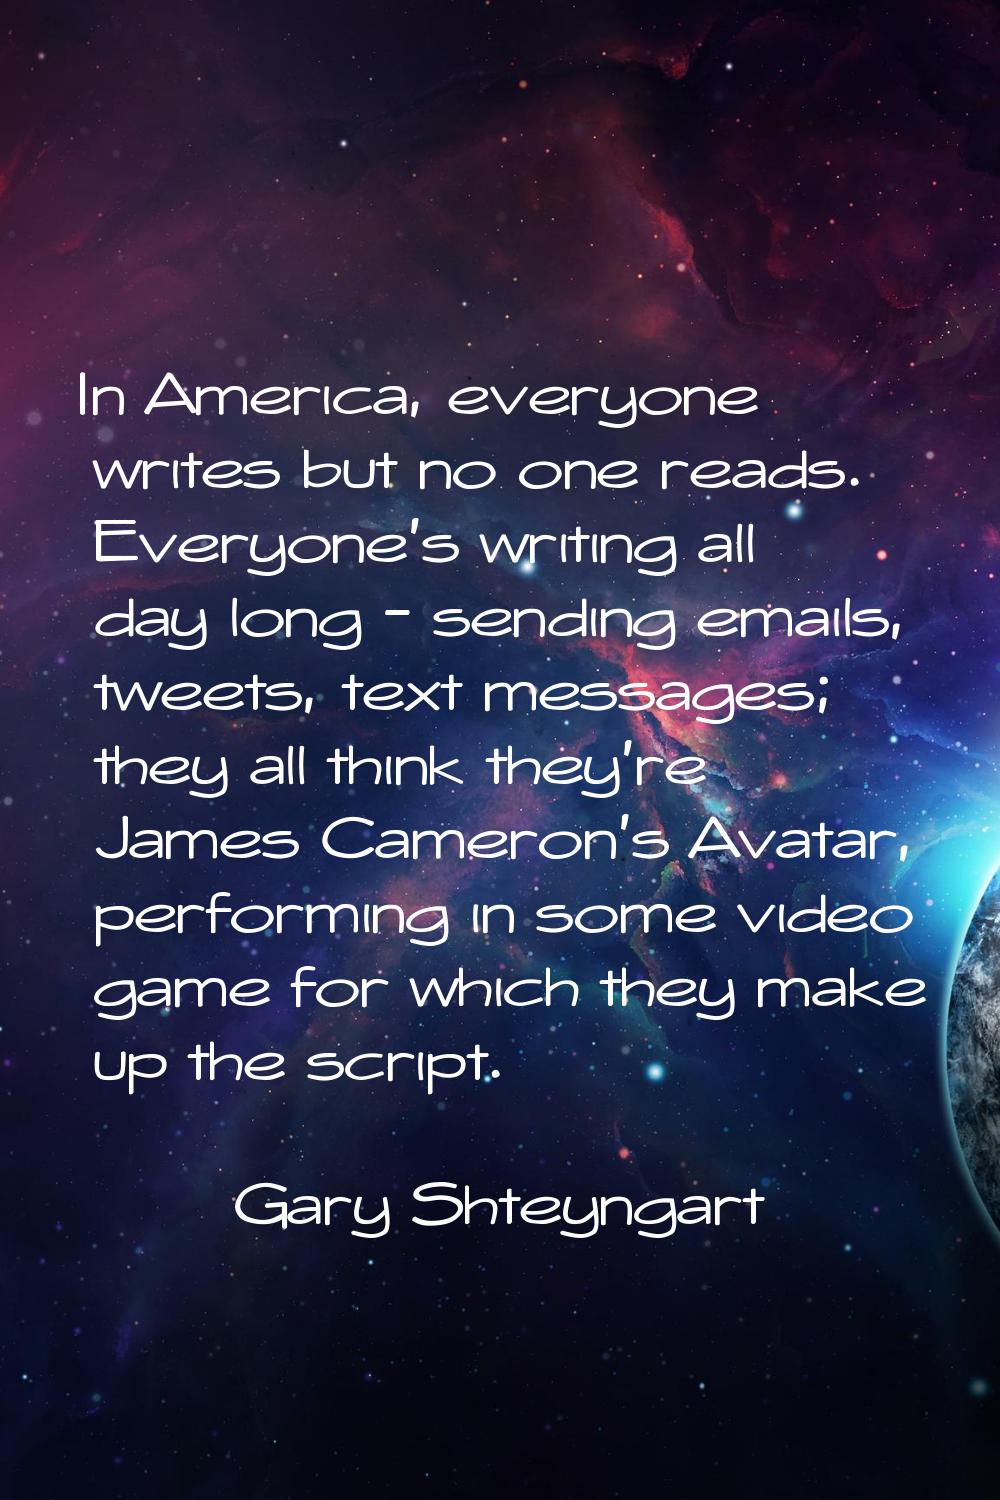 In America, everyone writes but no one reads. Everyone's writing all day long - sending emails, twe